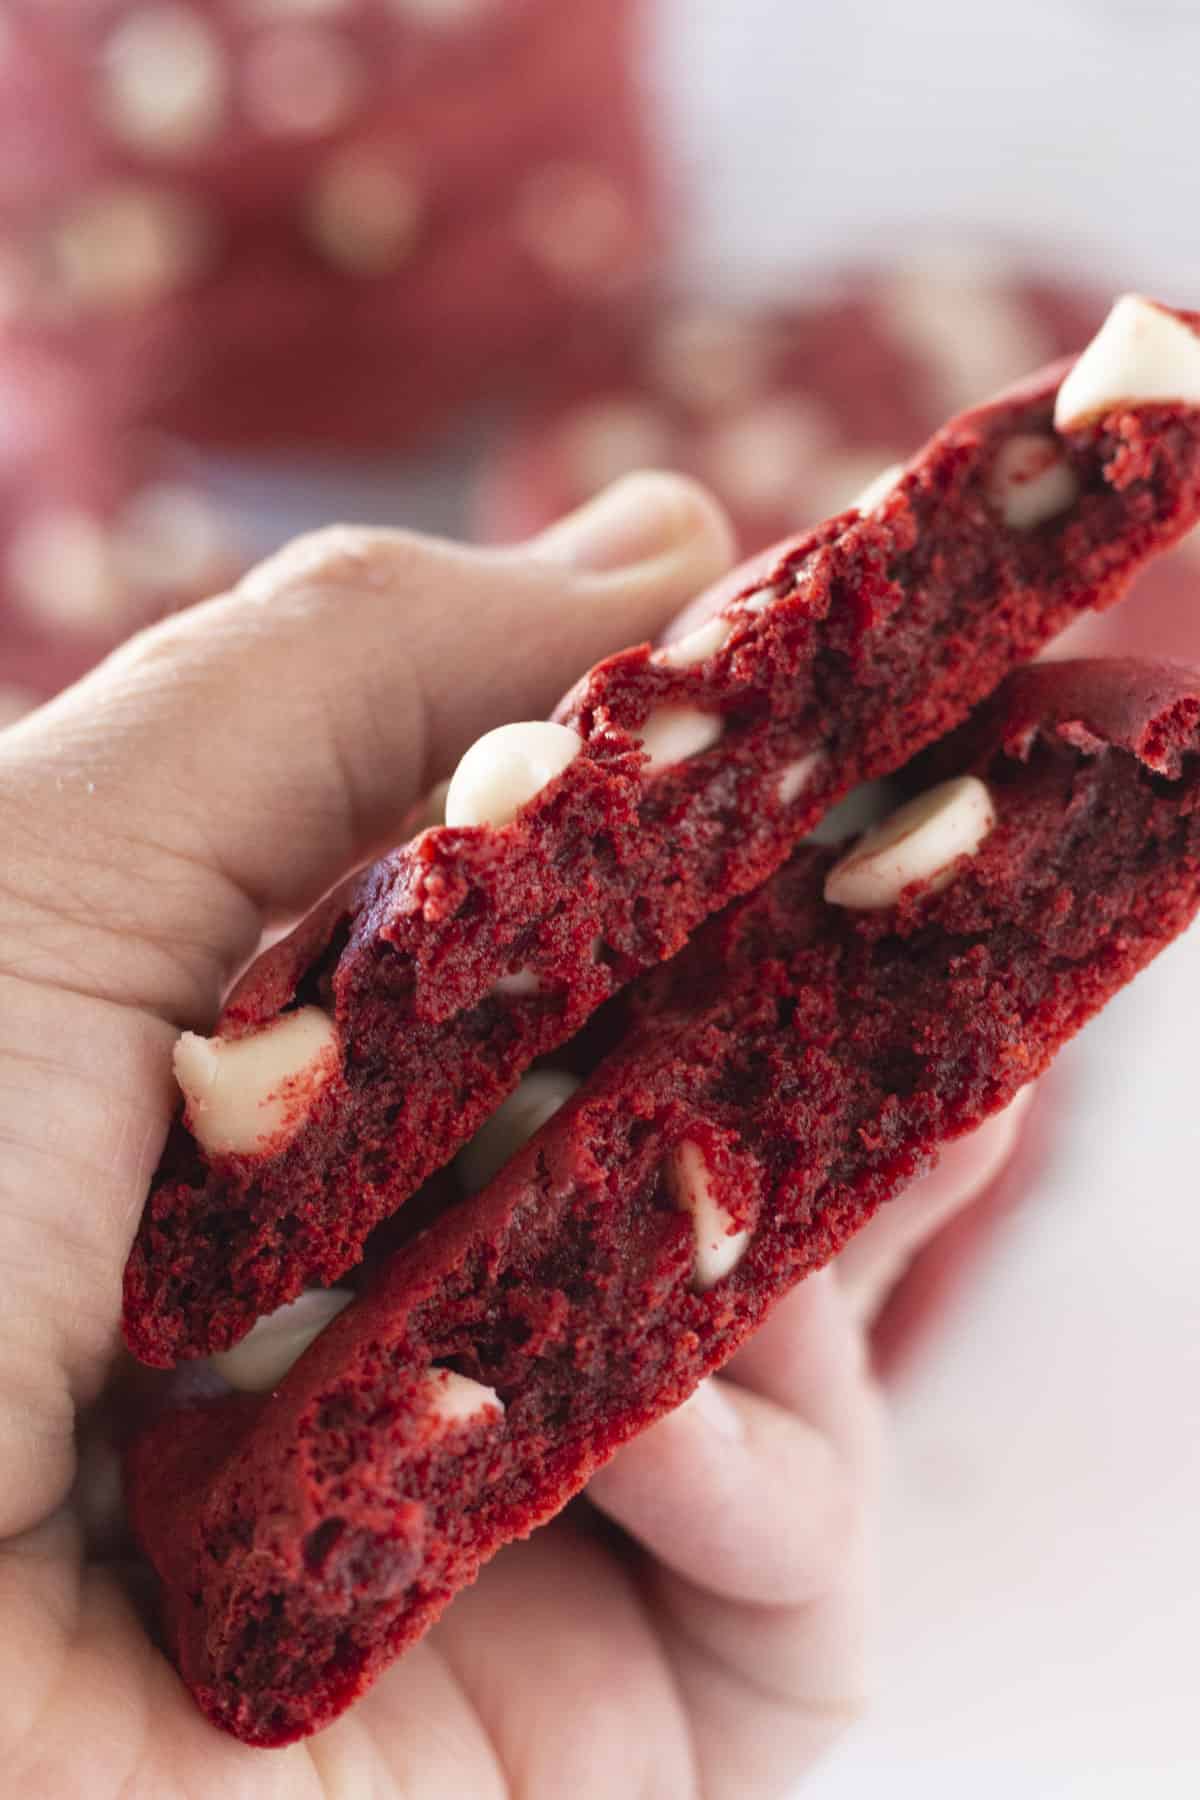 A red velvet cookie with white chocolate chips broke in half.